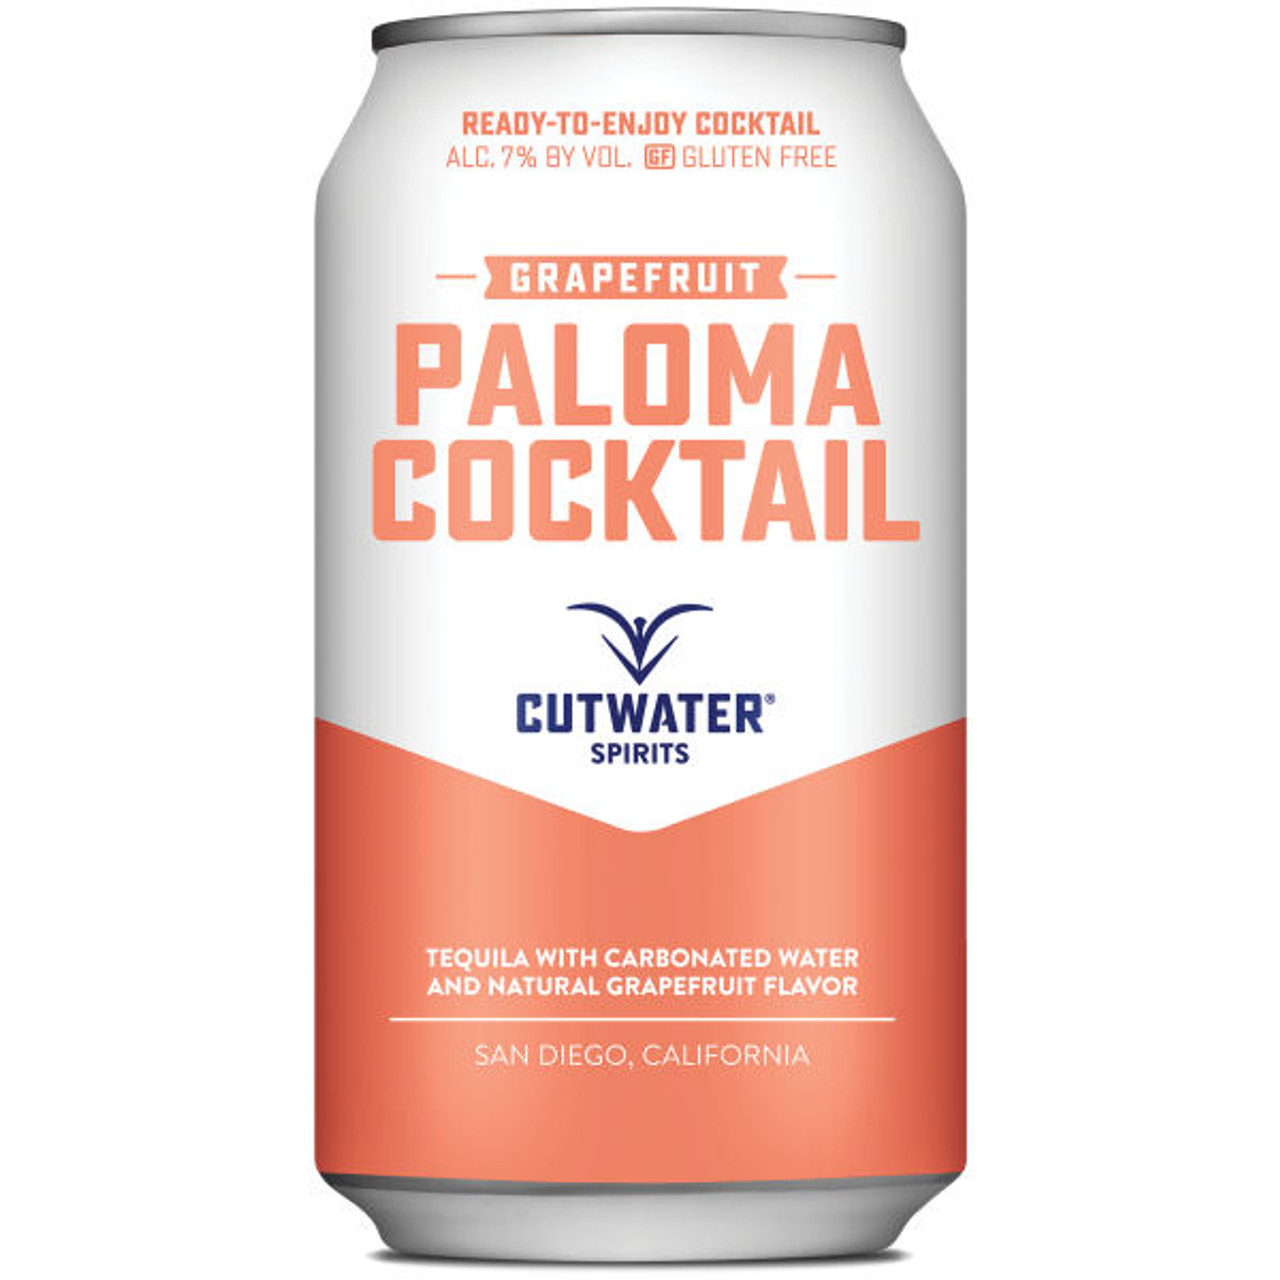 https://cdn11.bigcommerce.com/s-a04d0/images/stencil/1280x1280/products/15931/16993/cutwater-spirits-grapefruit-tequila-paloma-cocktail-ready-to-drink__26878.1697454744.jpg?c=2